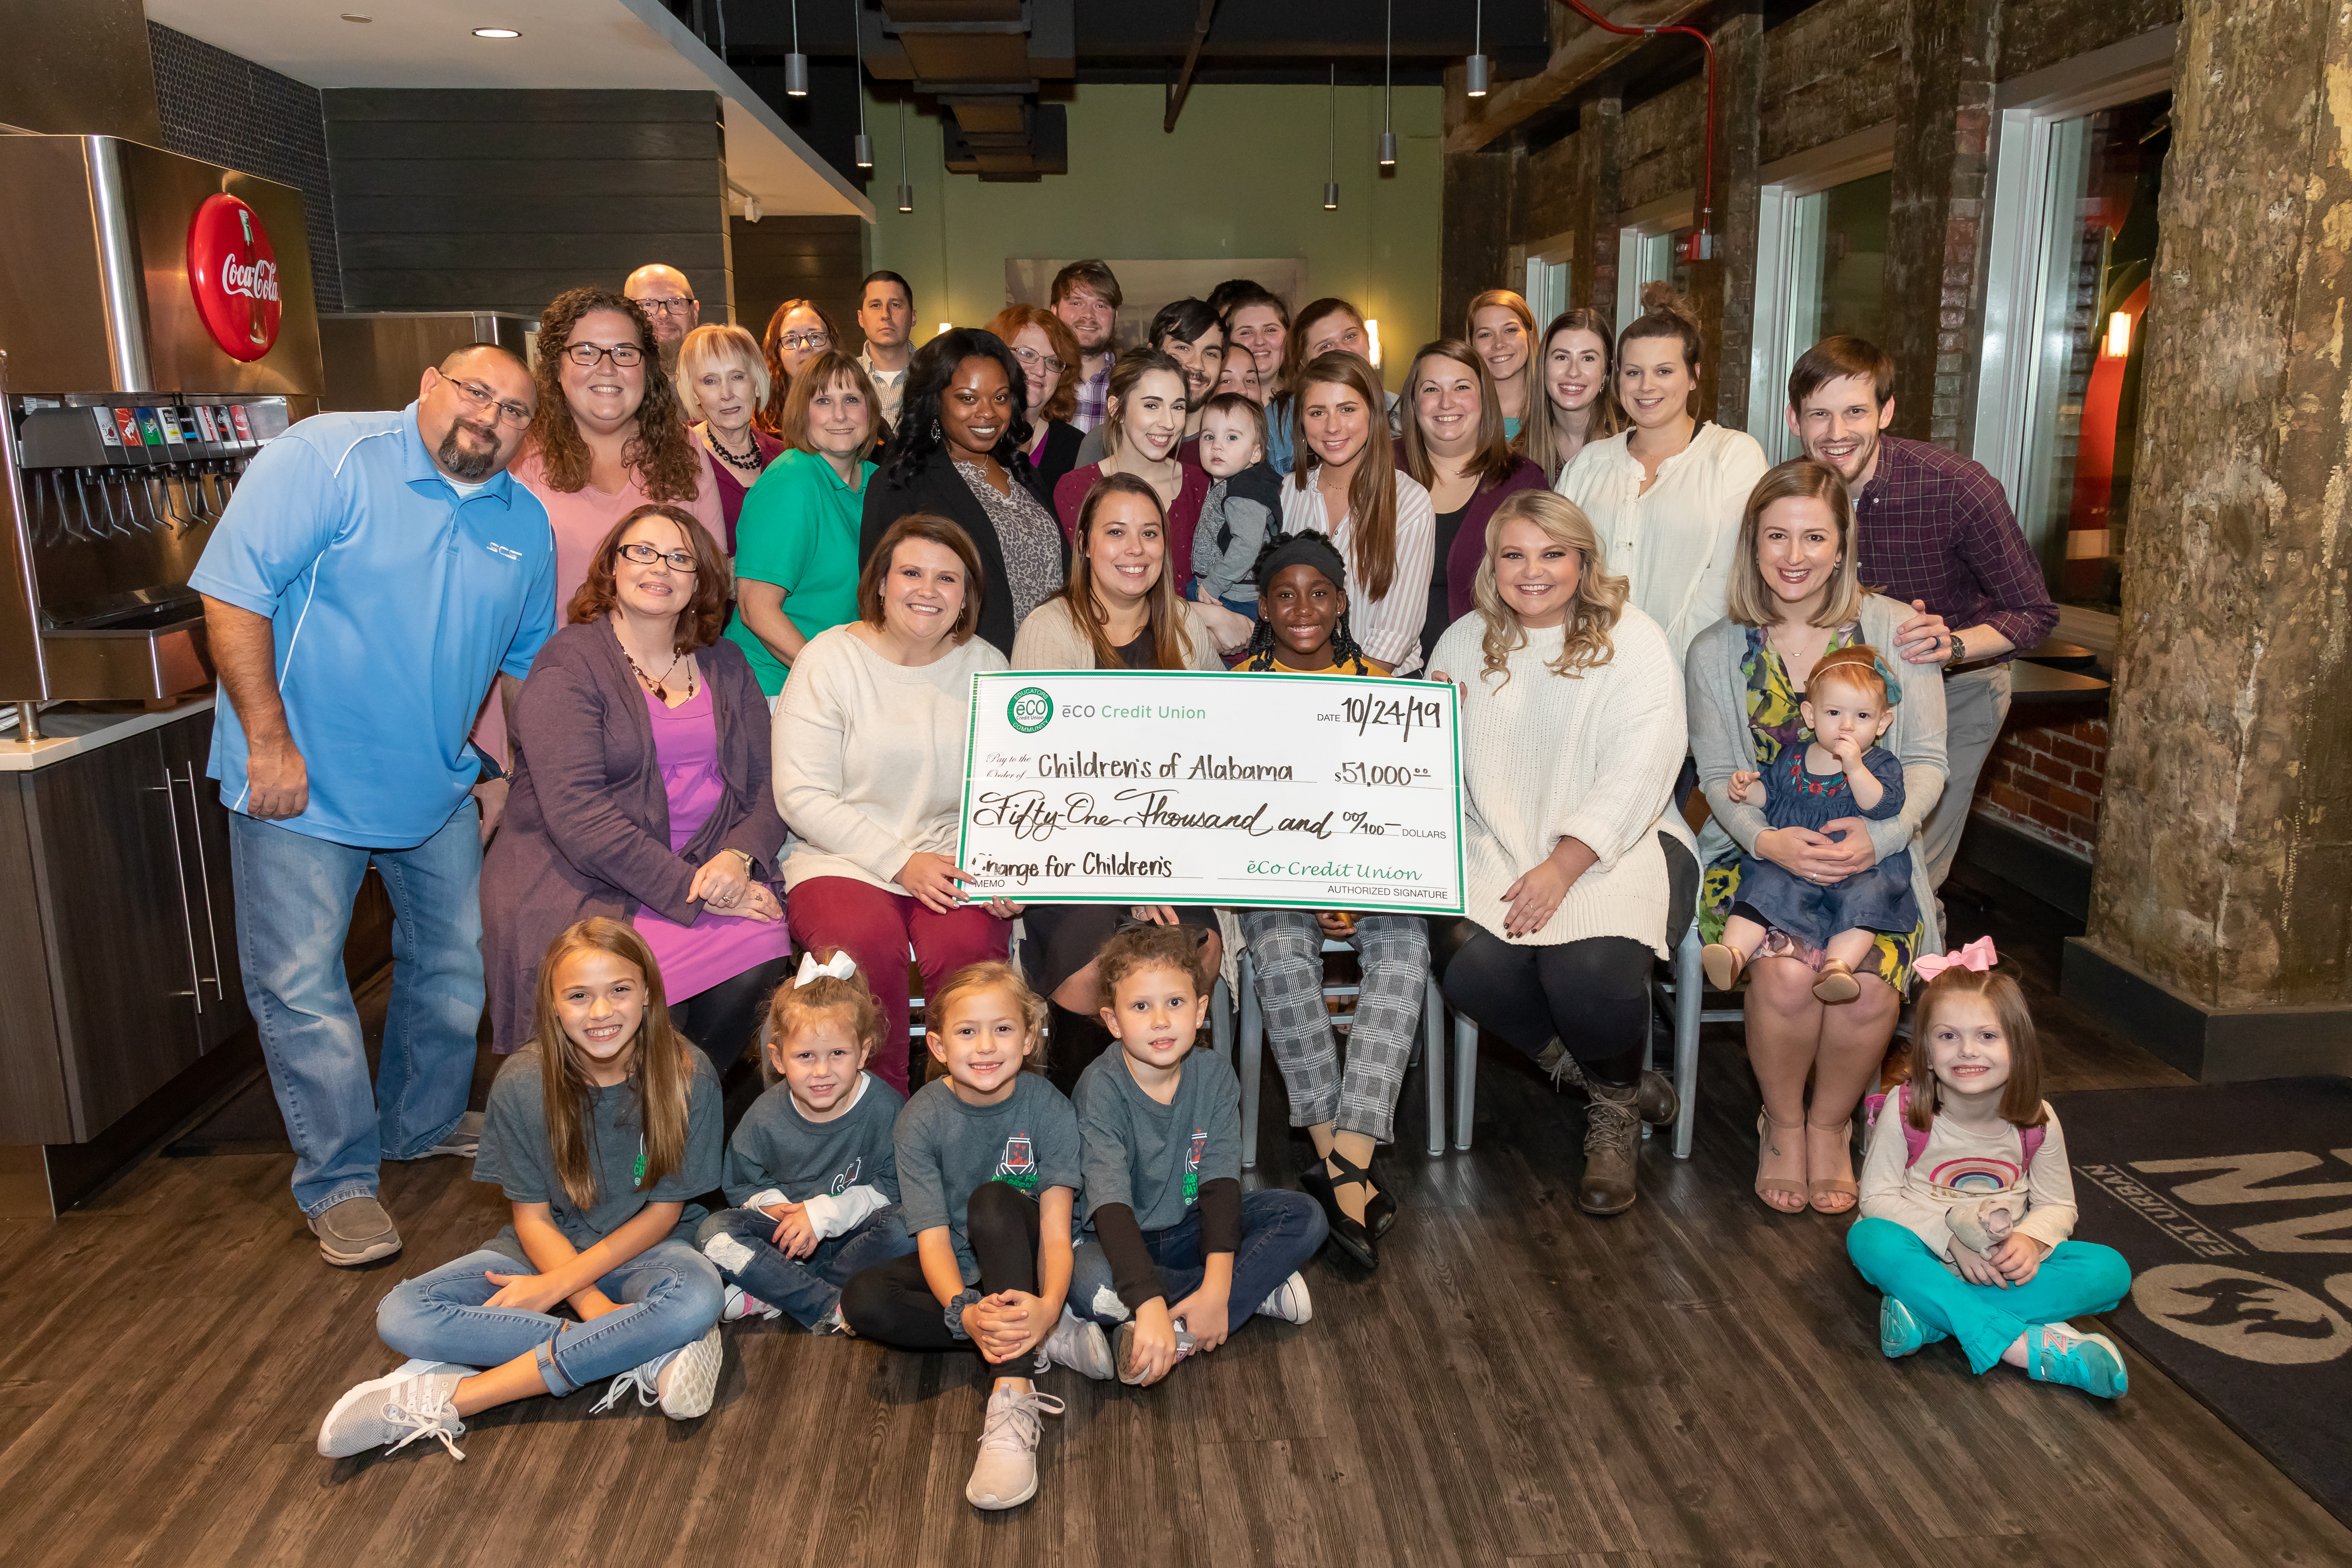 eCO Raises More Than $50,000 for Children's of Alabama 